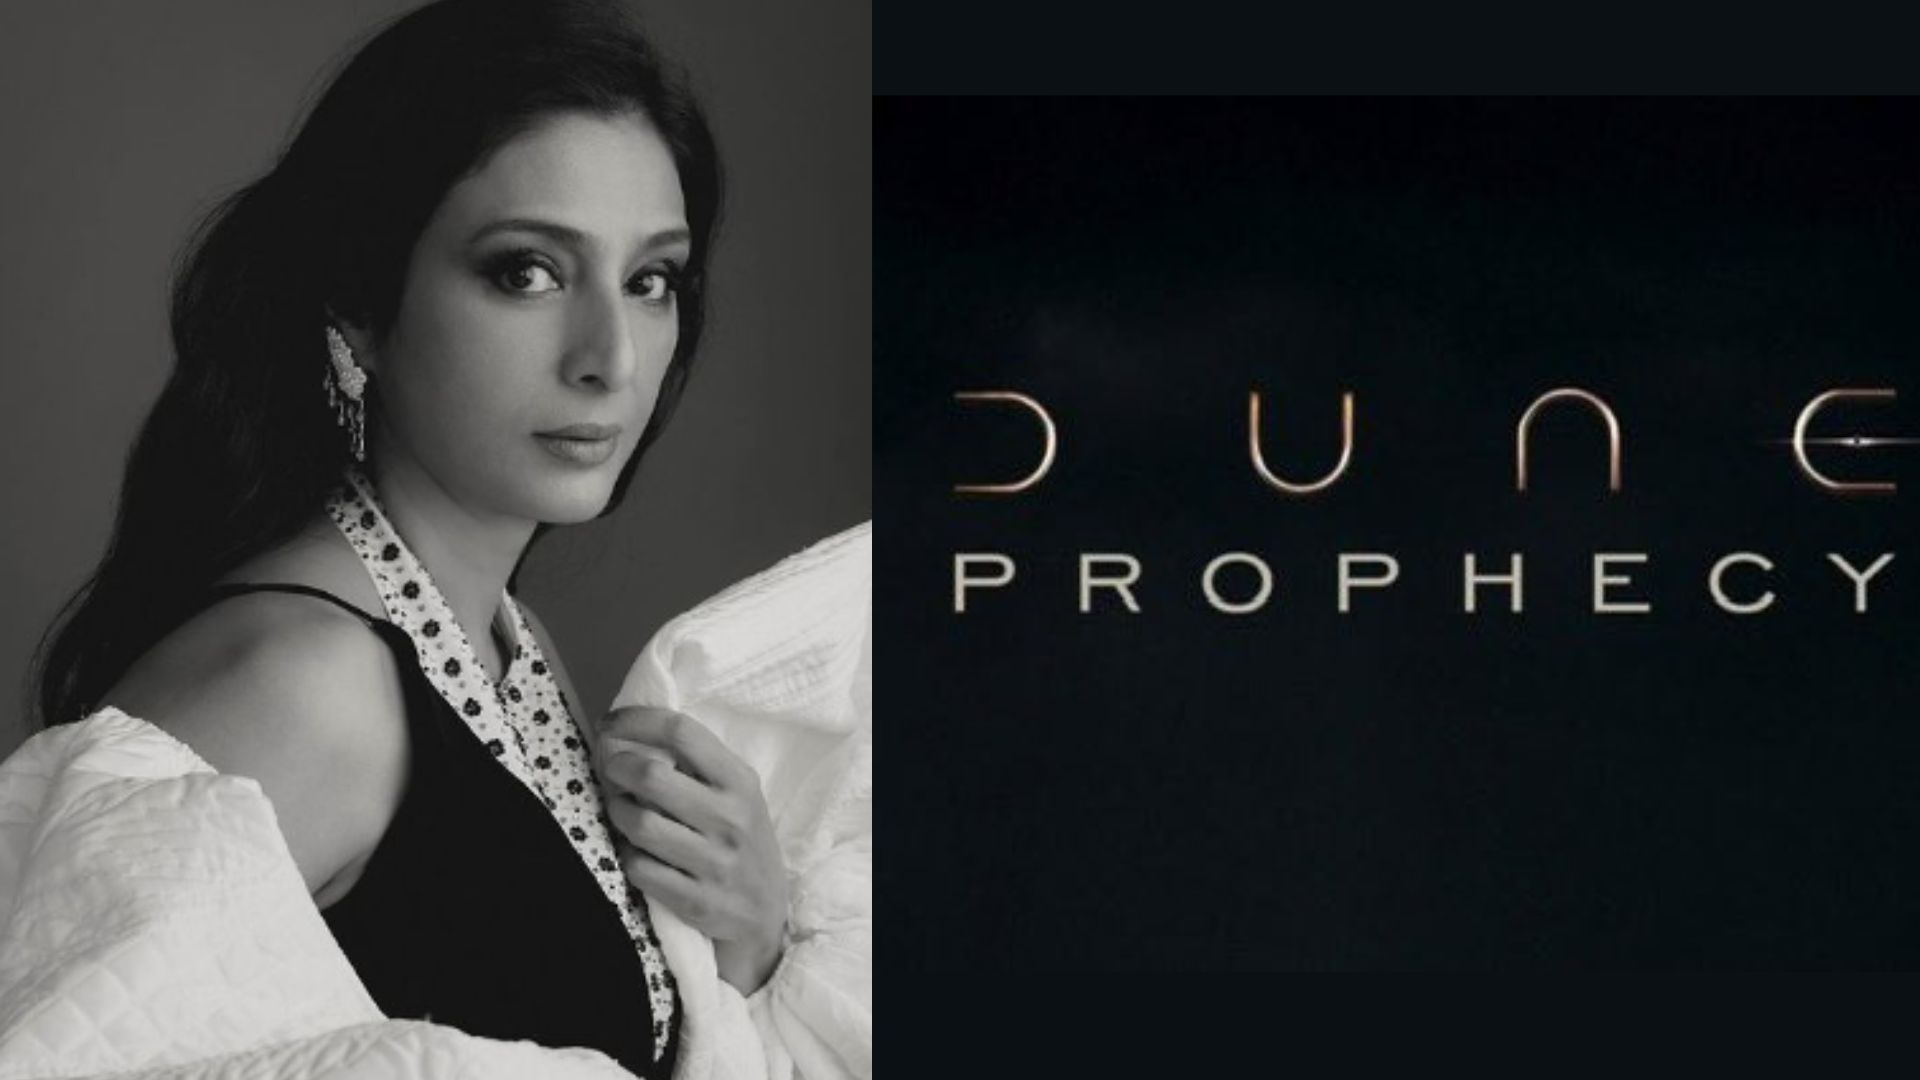 Tabu has been added to the ensemble cast of the prequel series Dune: Prophecy.